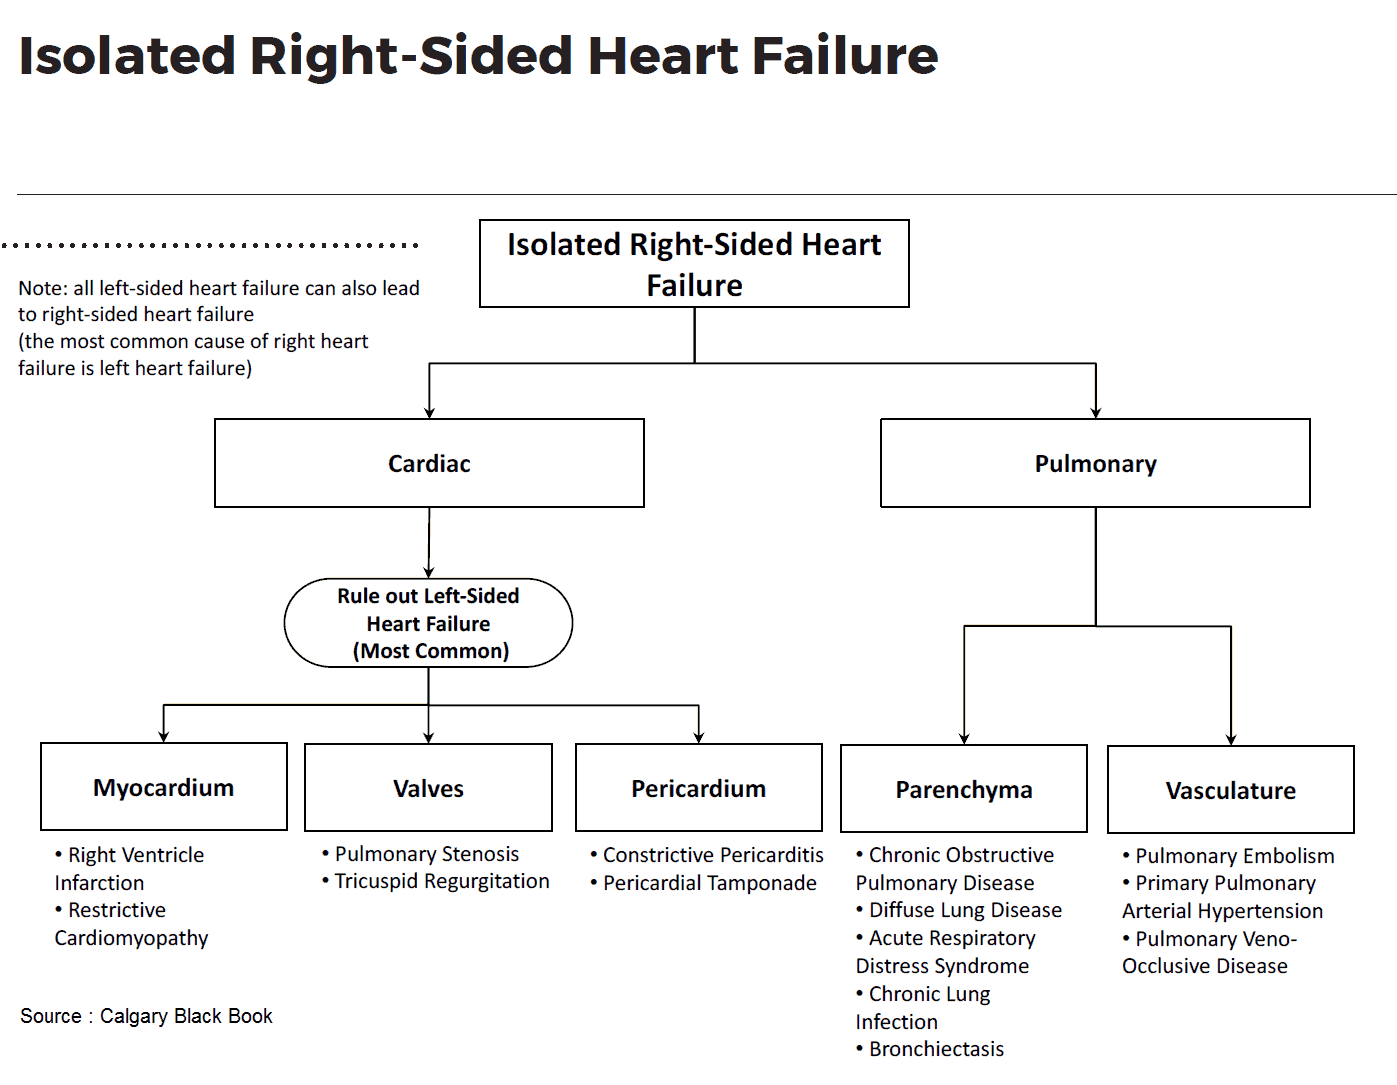 Causes of Isolated Right-Sided Heart Failure